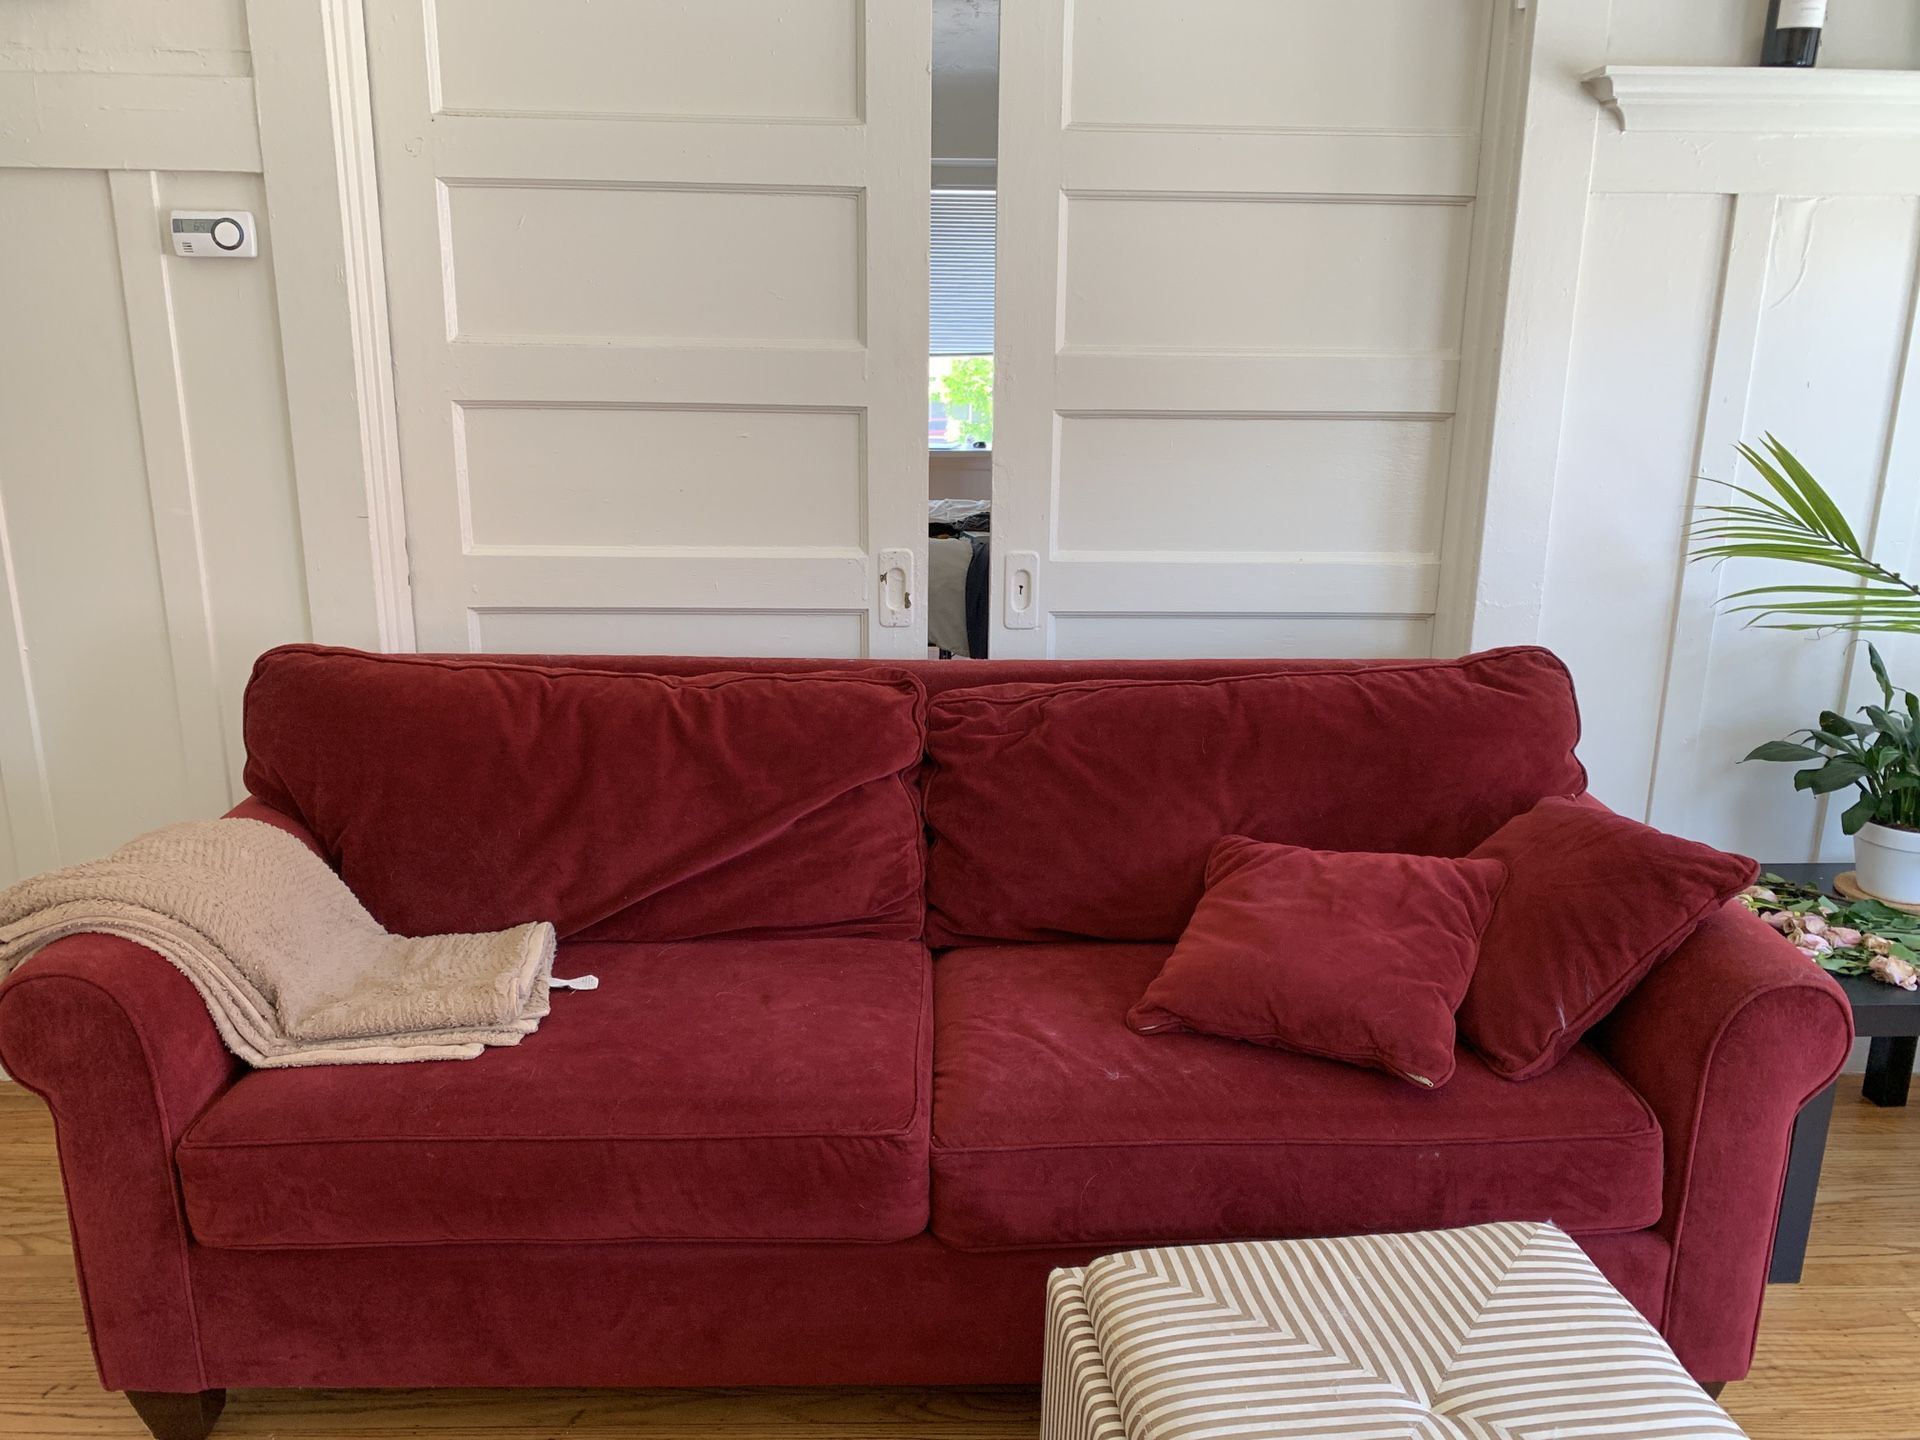 Red couch - $30